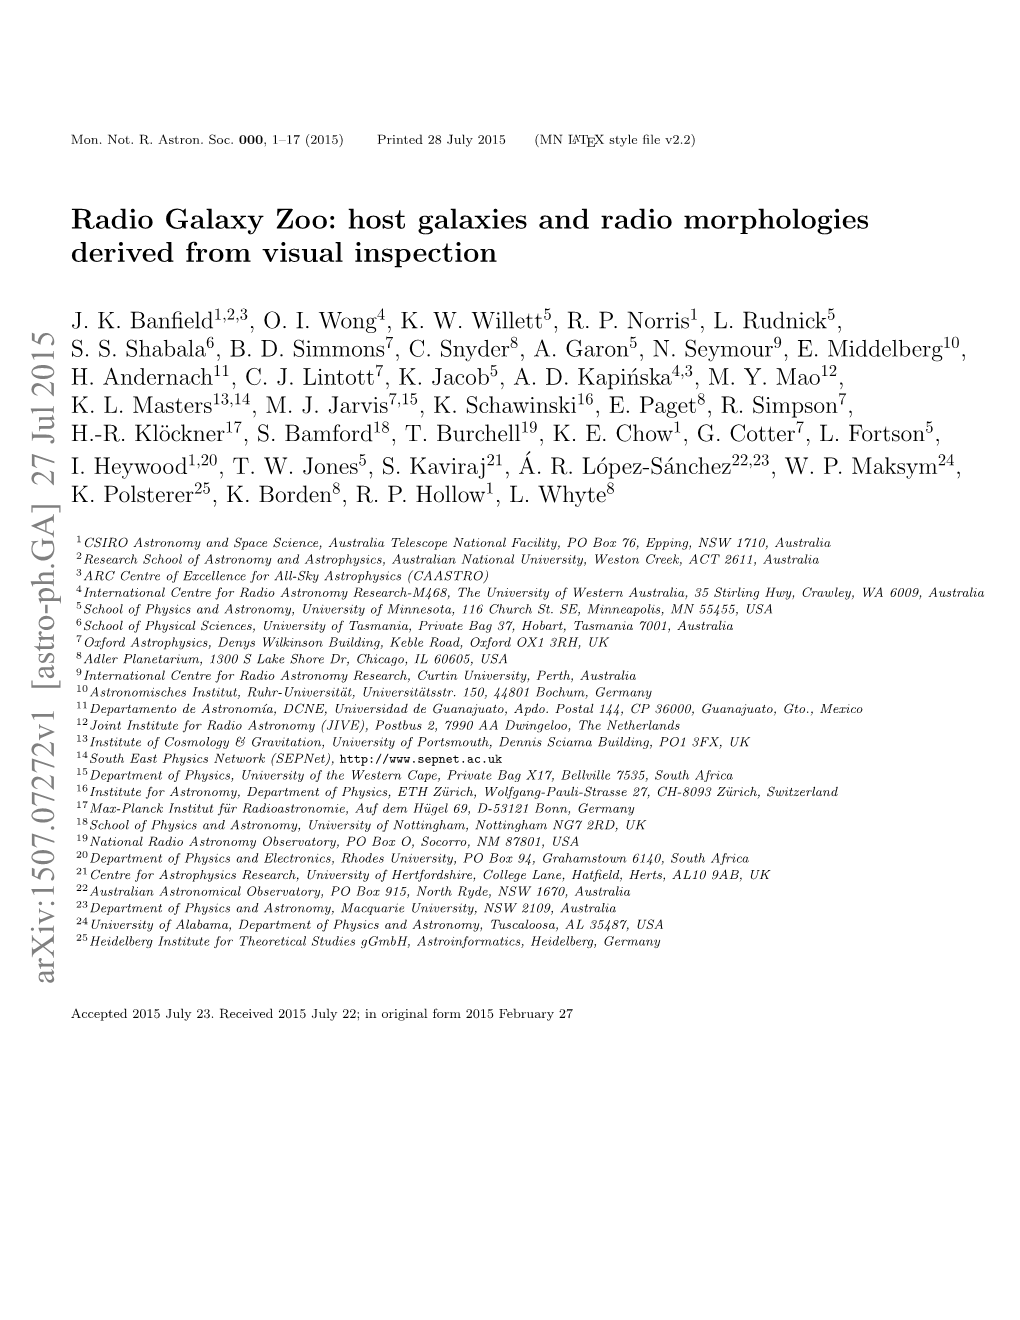 Radio Galaxy Zoo: Host Galaxies and Radio Morphologies Derived from Visual Inspection